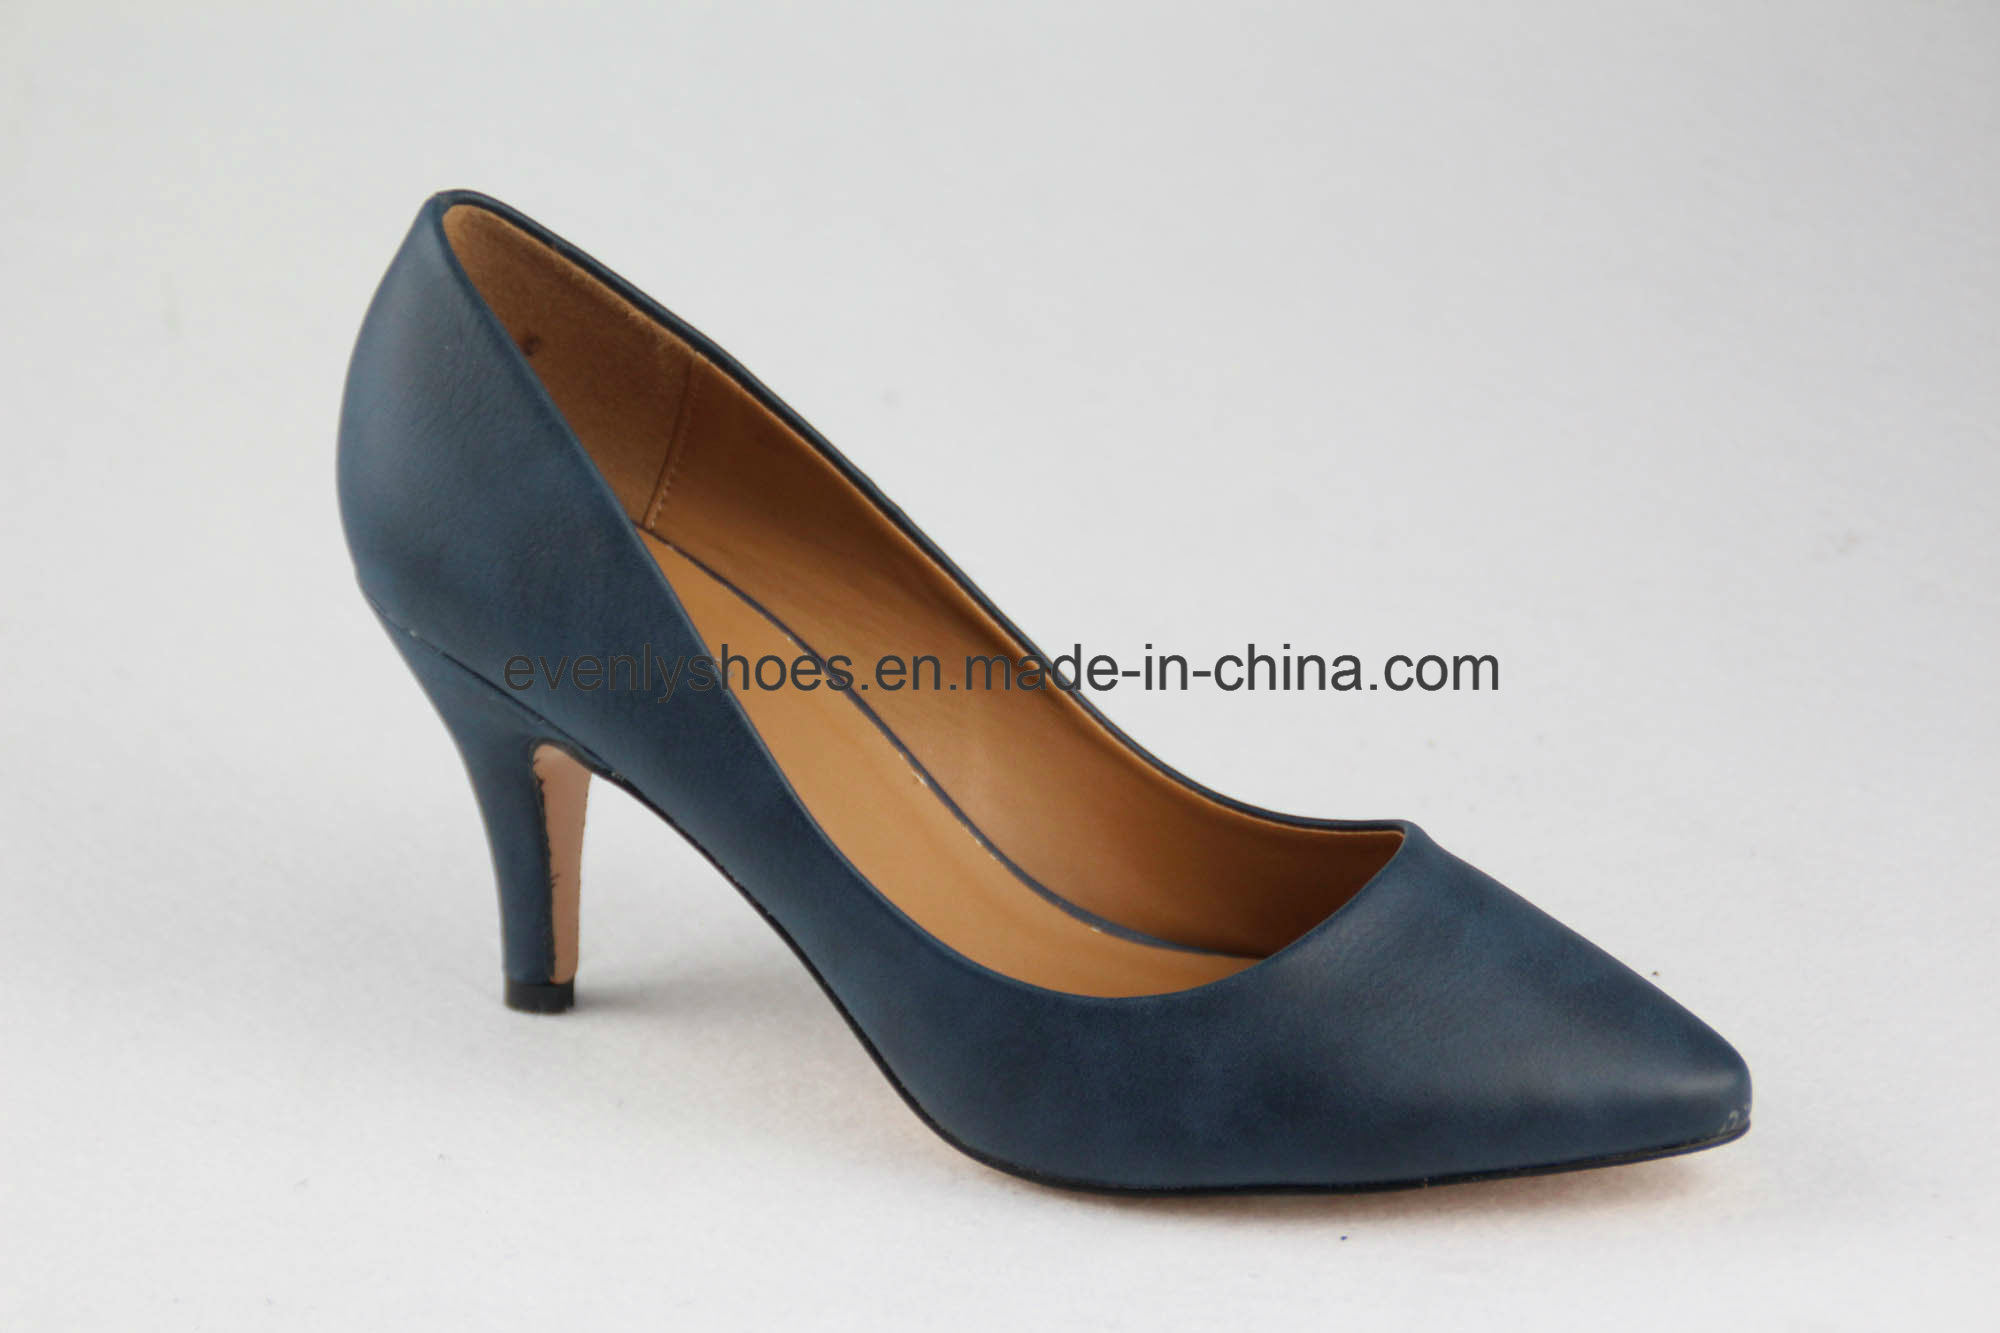 New Fashion Design Ladies Shoes with High Heel